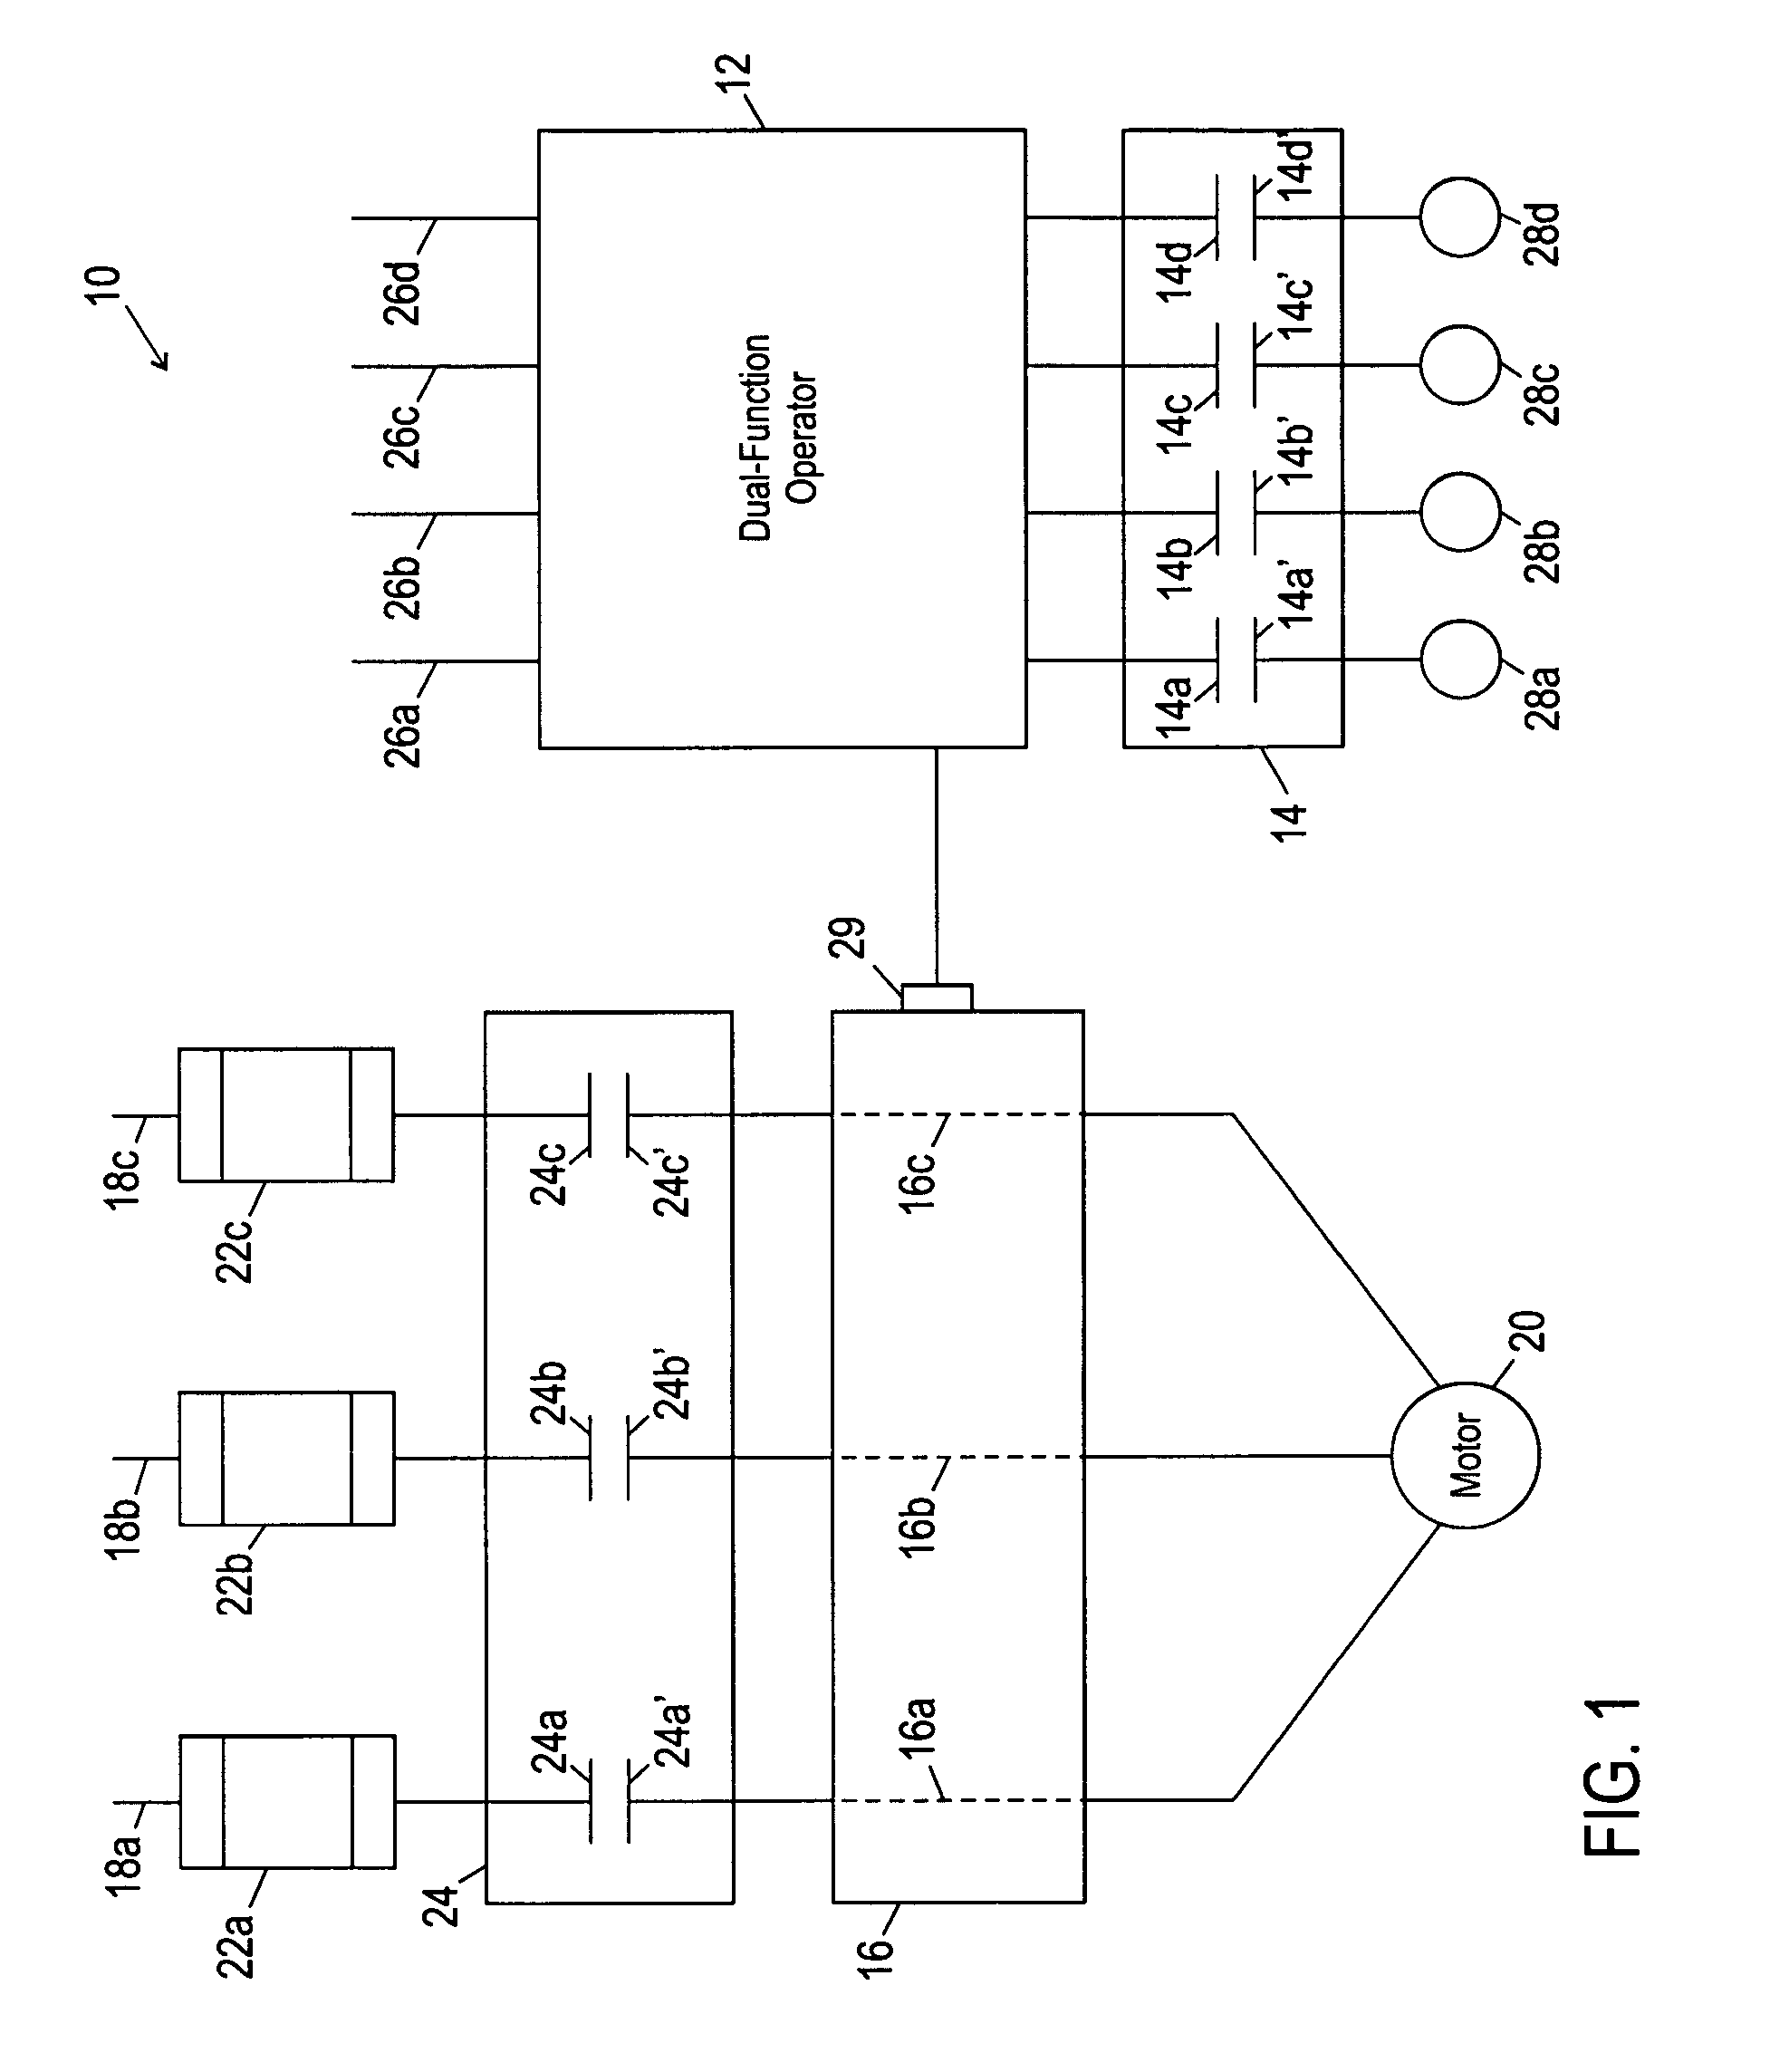 Dual function reset operator for an electrical device